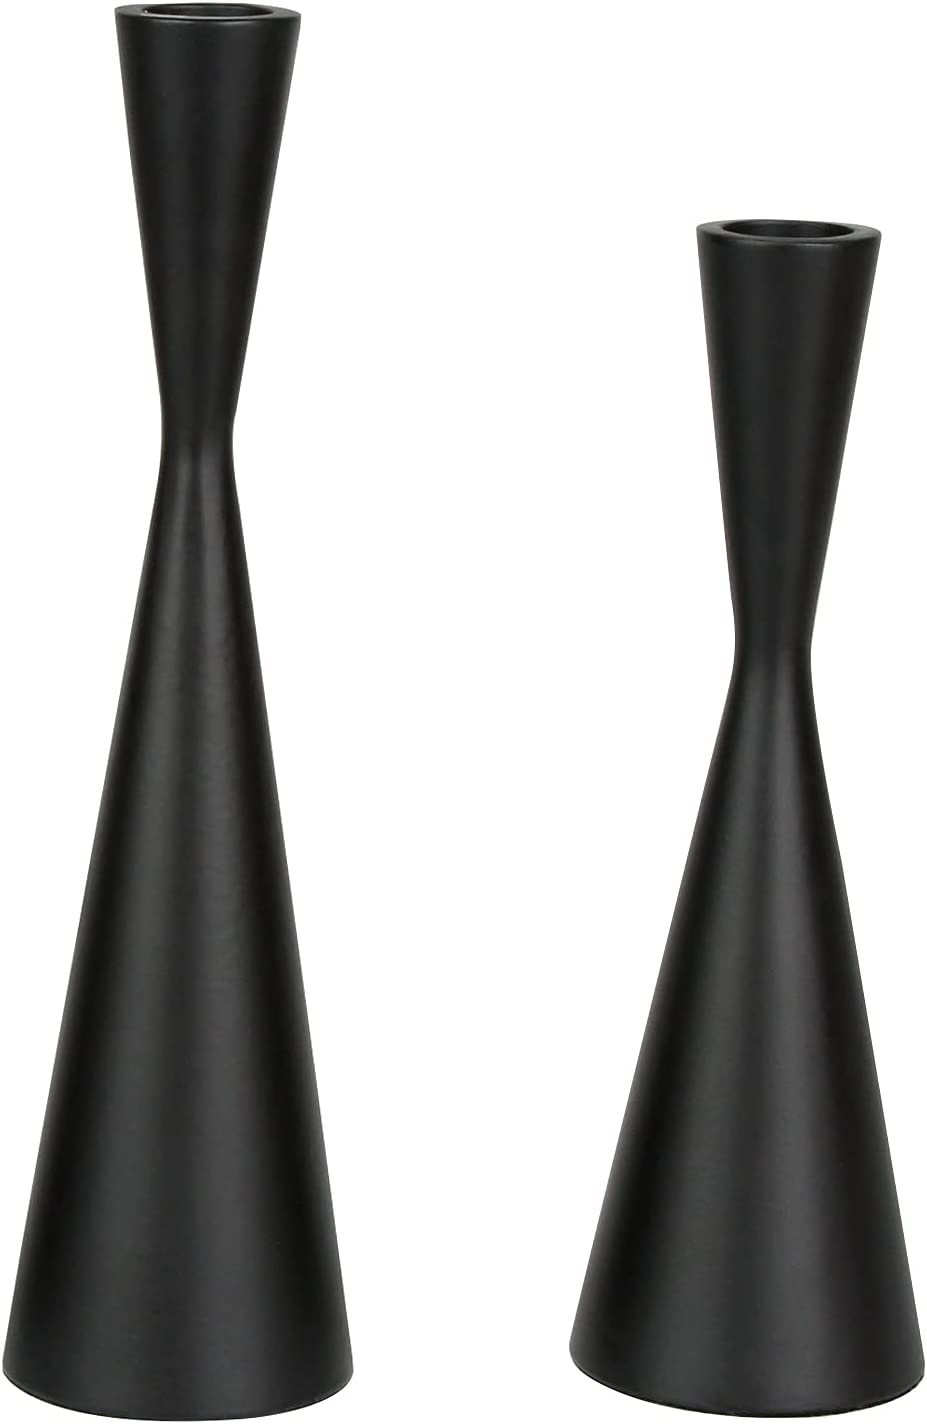 Vixdonos Iron Tall Tapered Candlestick Holders, 2-Pack